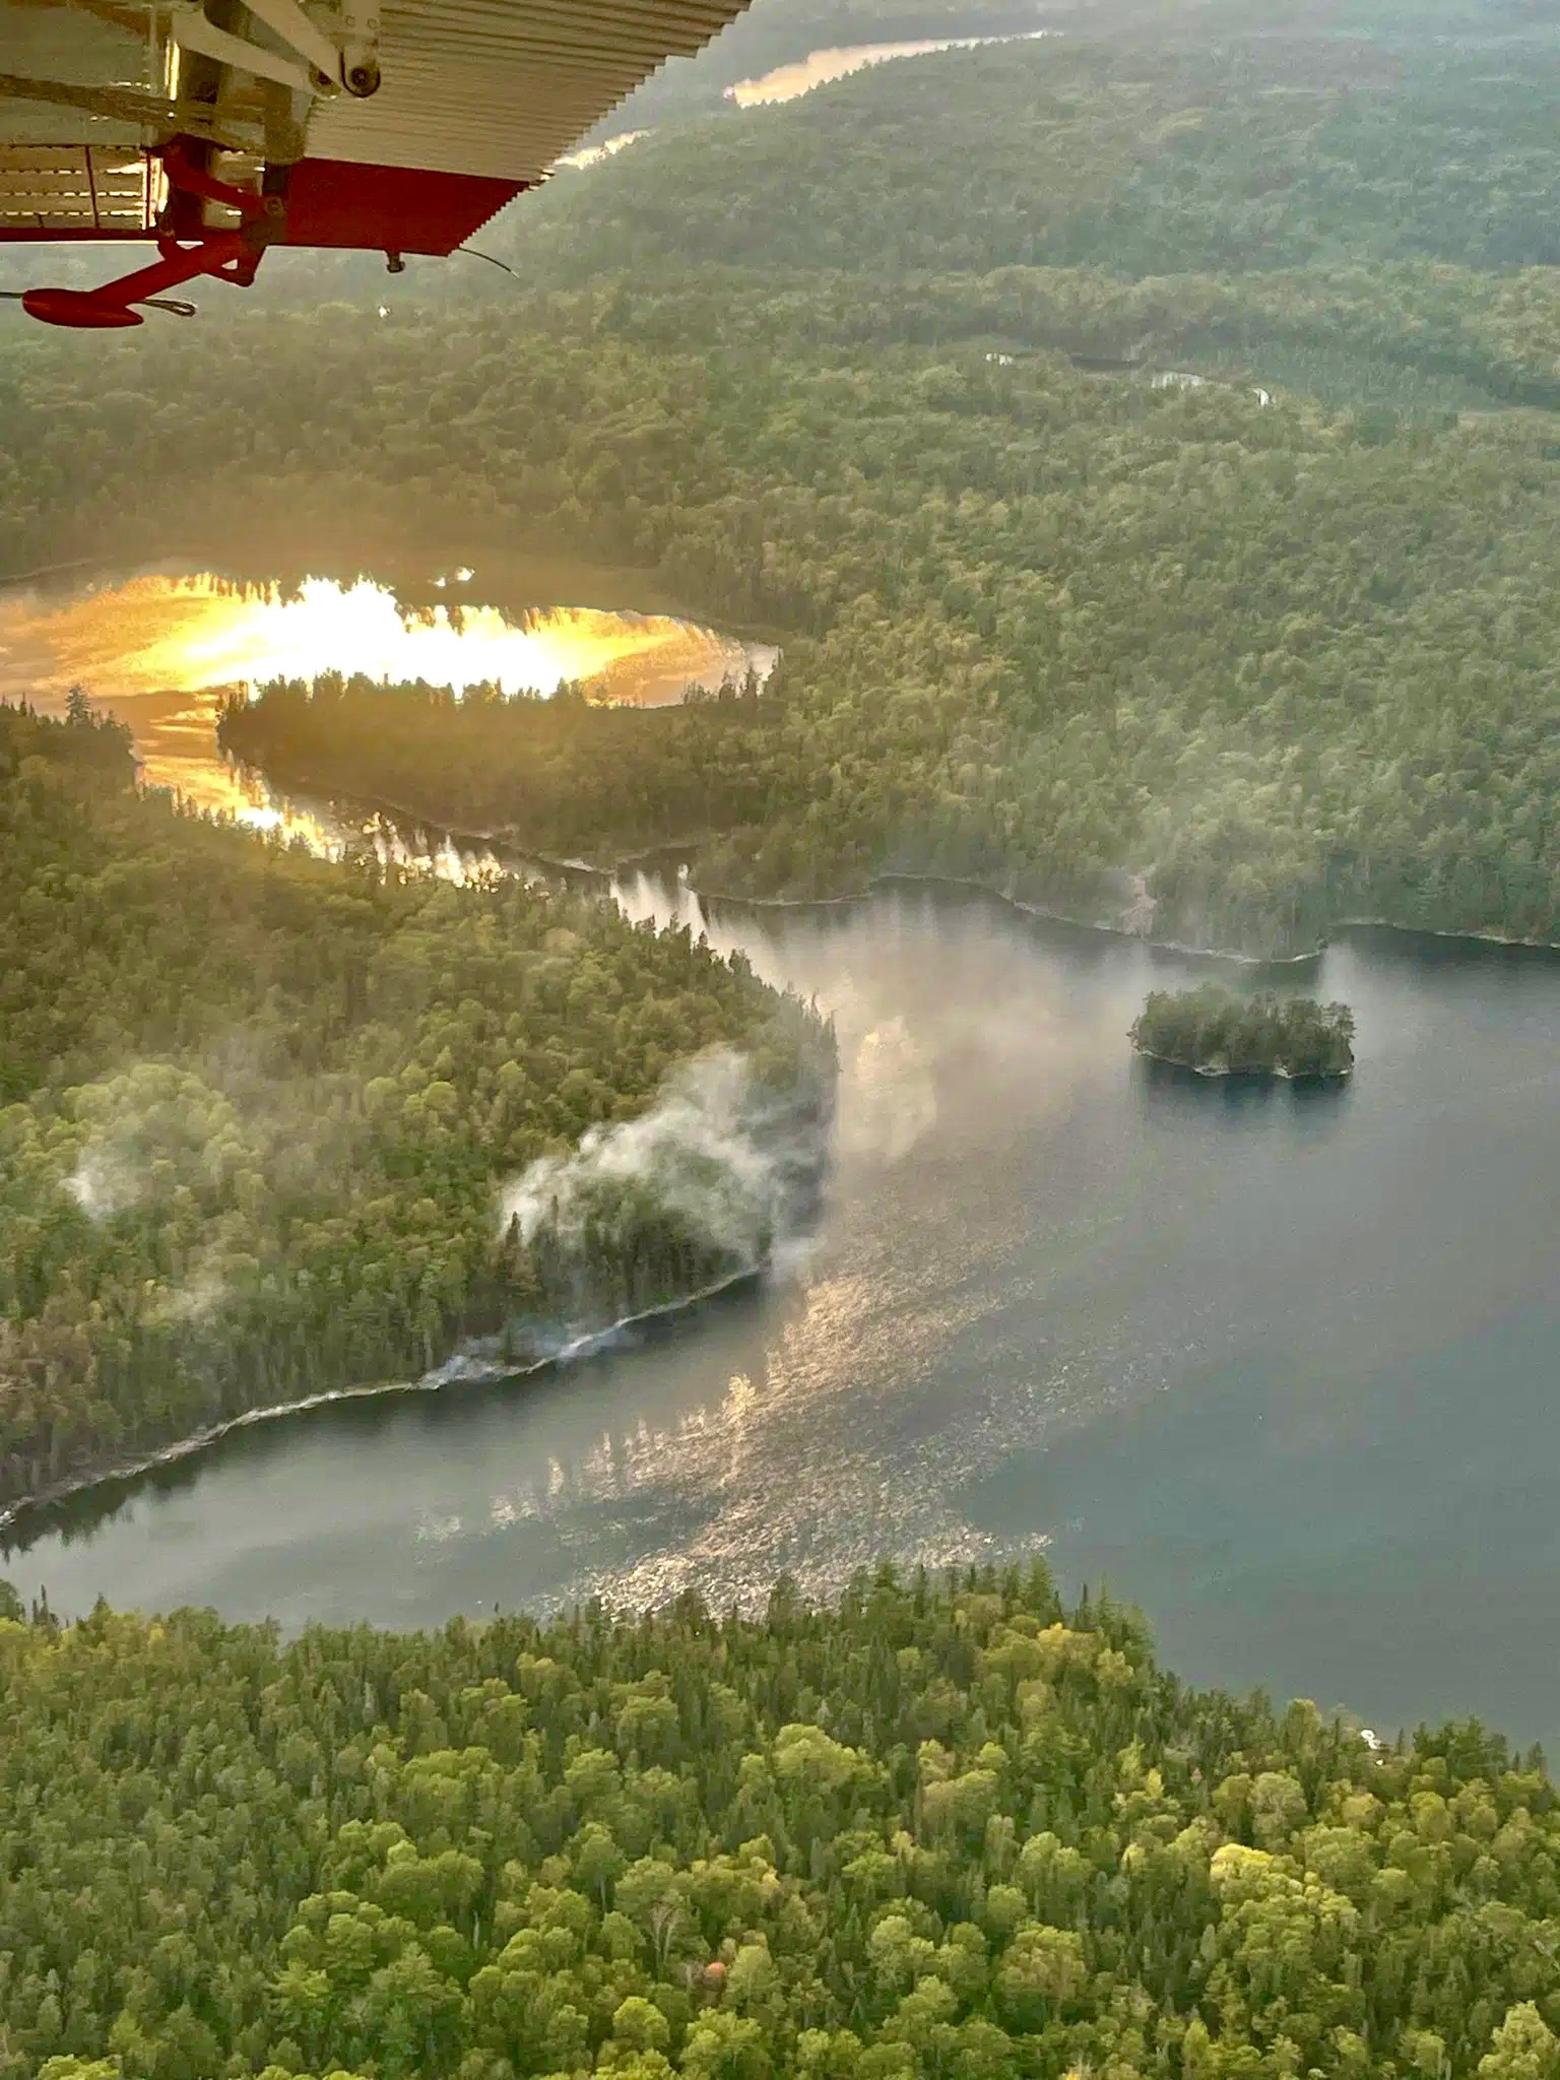 The Forest Service shared these aerial views of some of the areas burned by forest fires that reached the Boundary Waters in the summer of 2021, a harbinger of hotter and drier conditions related to climate change. All by itself, without concerns related to water contamination, climate change is already disrupting the ecosystem of the Upper Midwest, stressing forests and species like moose. 